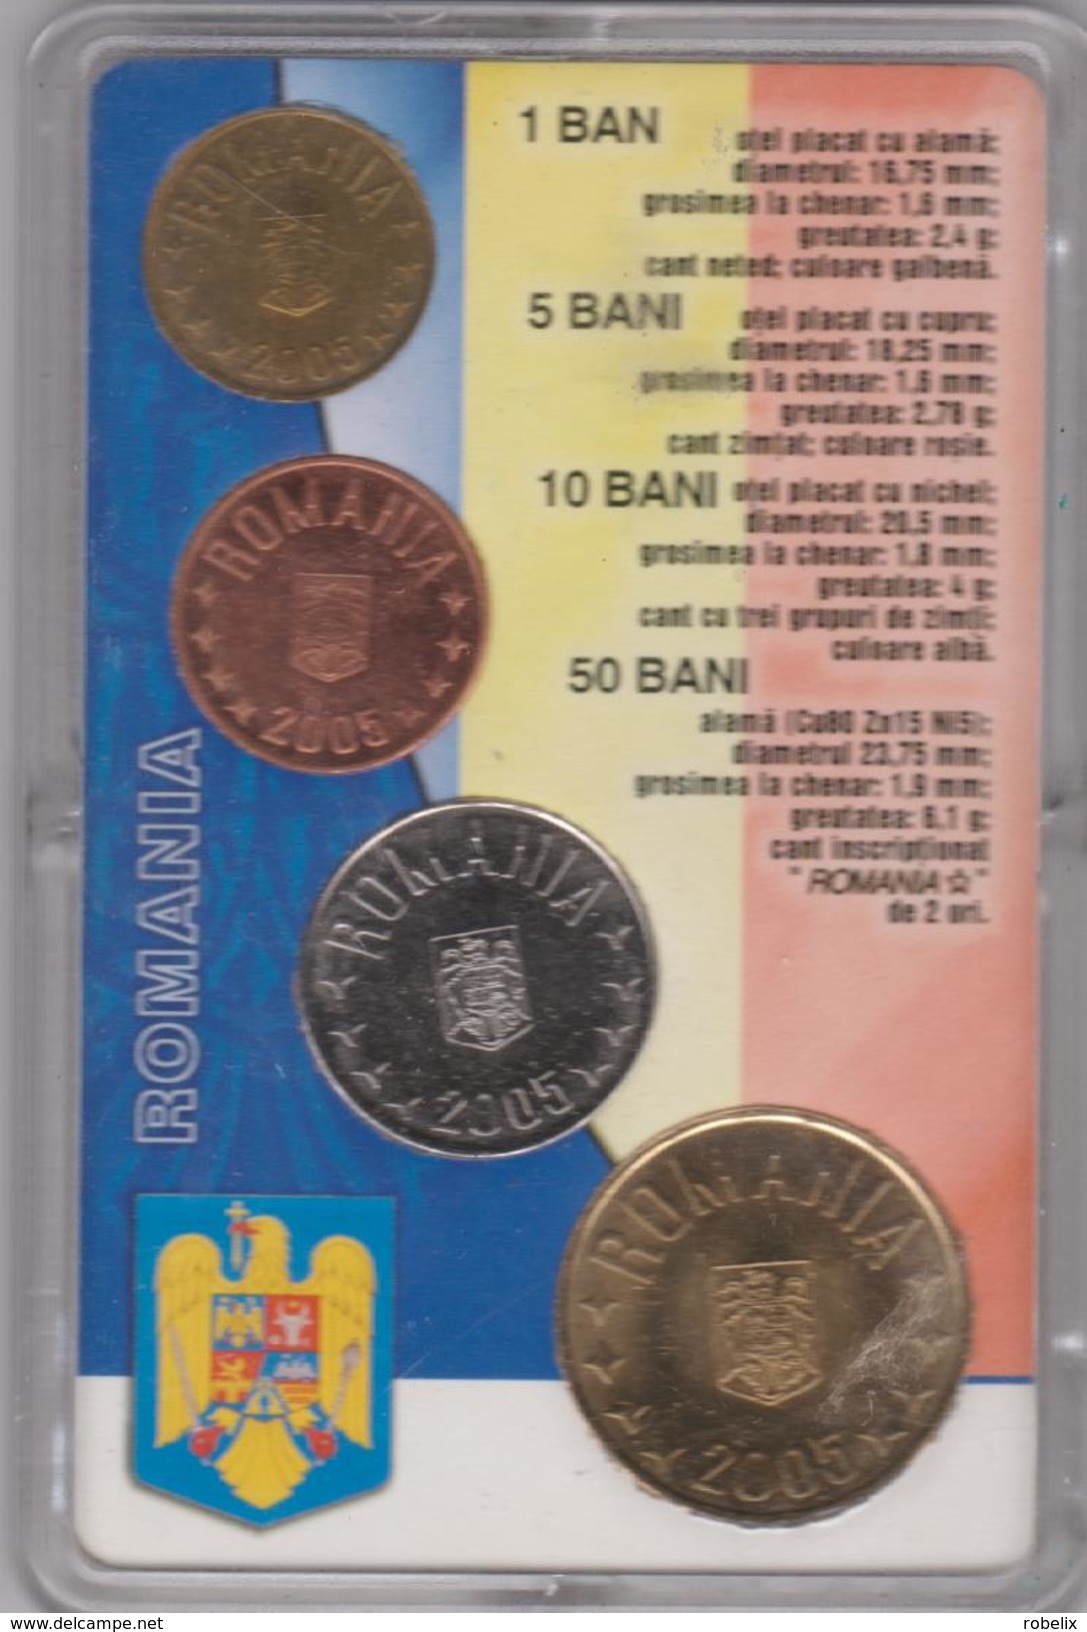 ROMANIA  2005  Coins (1; 5; 10; 50 Bani)-issue July 1, 2005- Official Box Of Romanian National Bank - Romania